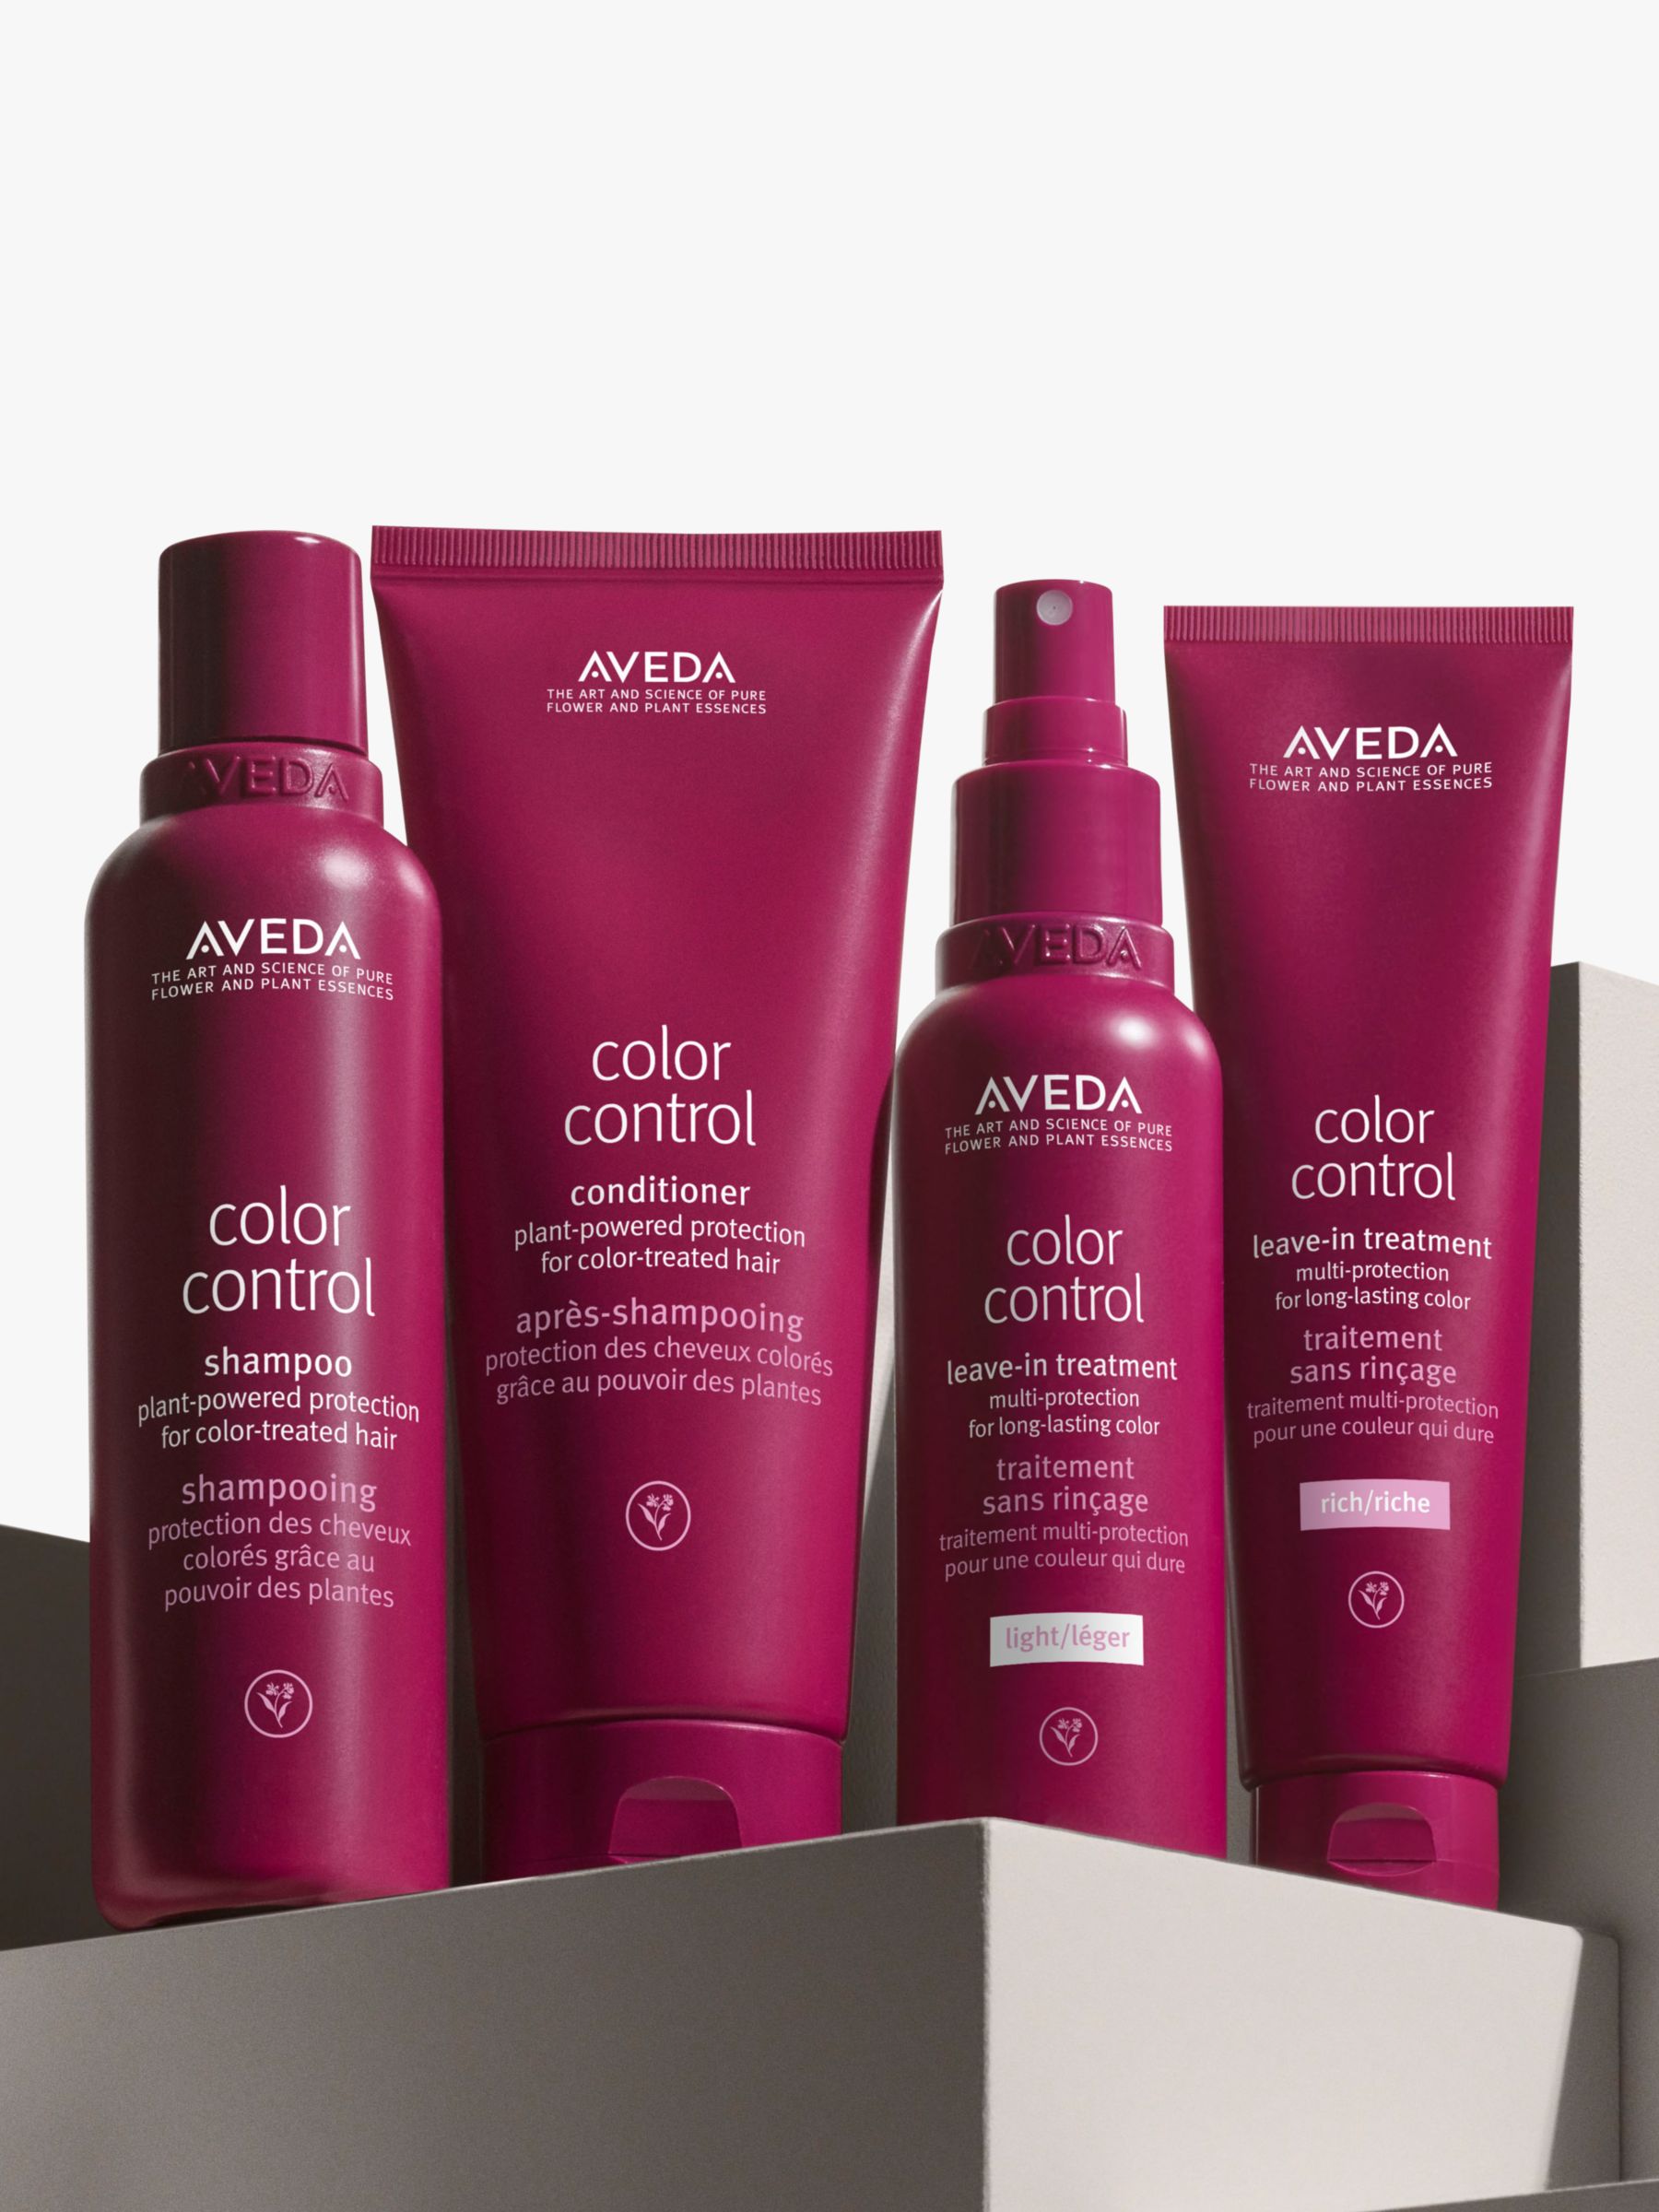 Aveda Colour Control Leave-In Treatment, Rich, 100ml